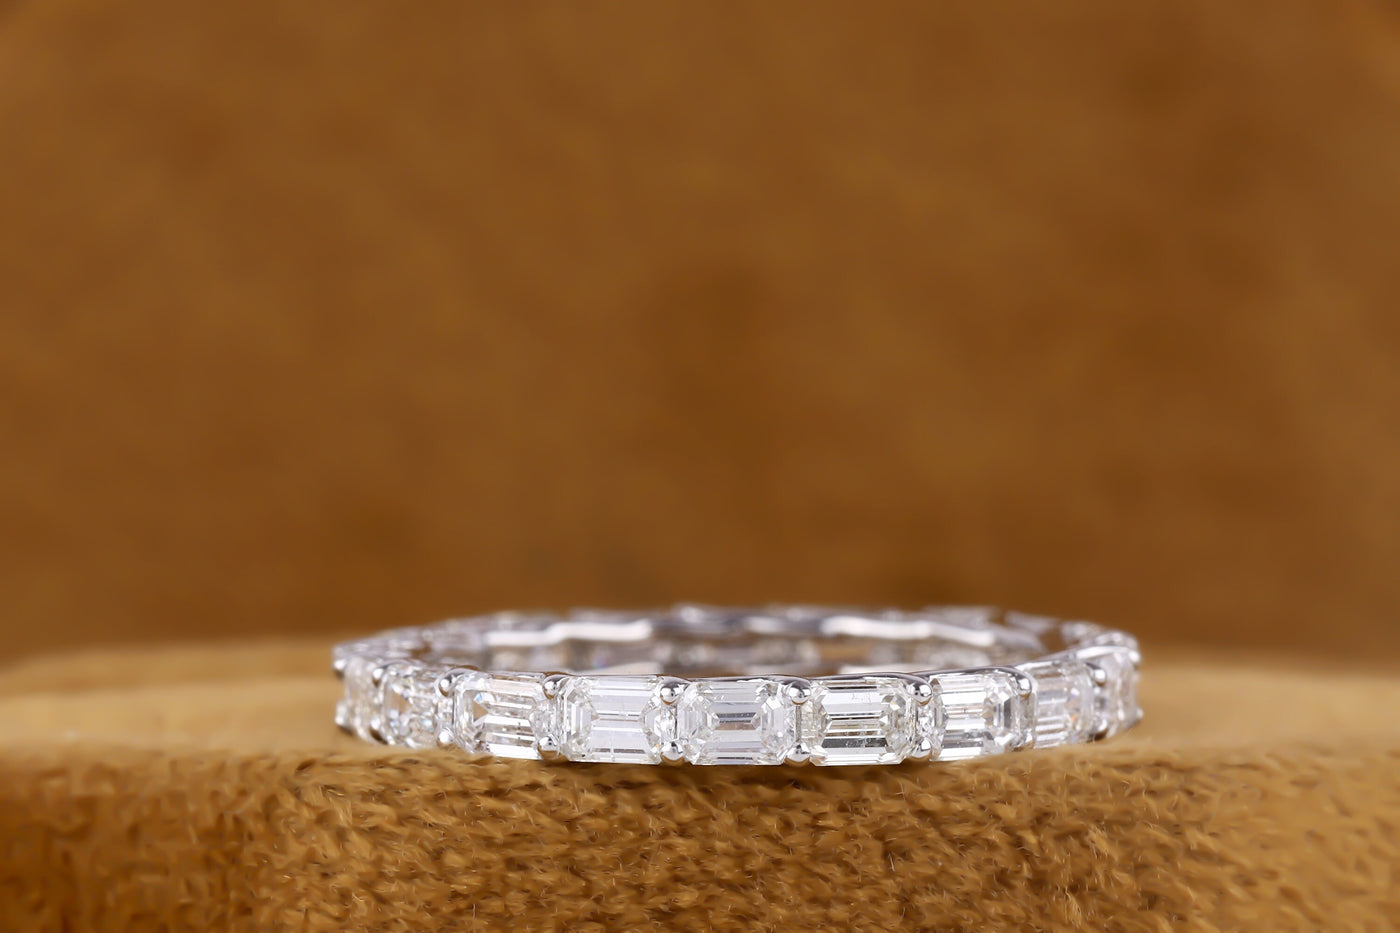 East West Solitaire Band, Emerald Cut Colorless Moissanite Wedding Band, 14K White Gold Band, Full Eternity Band, Stacking Band For Her